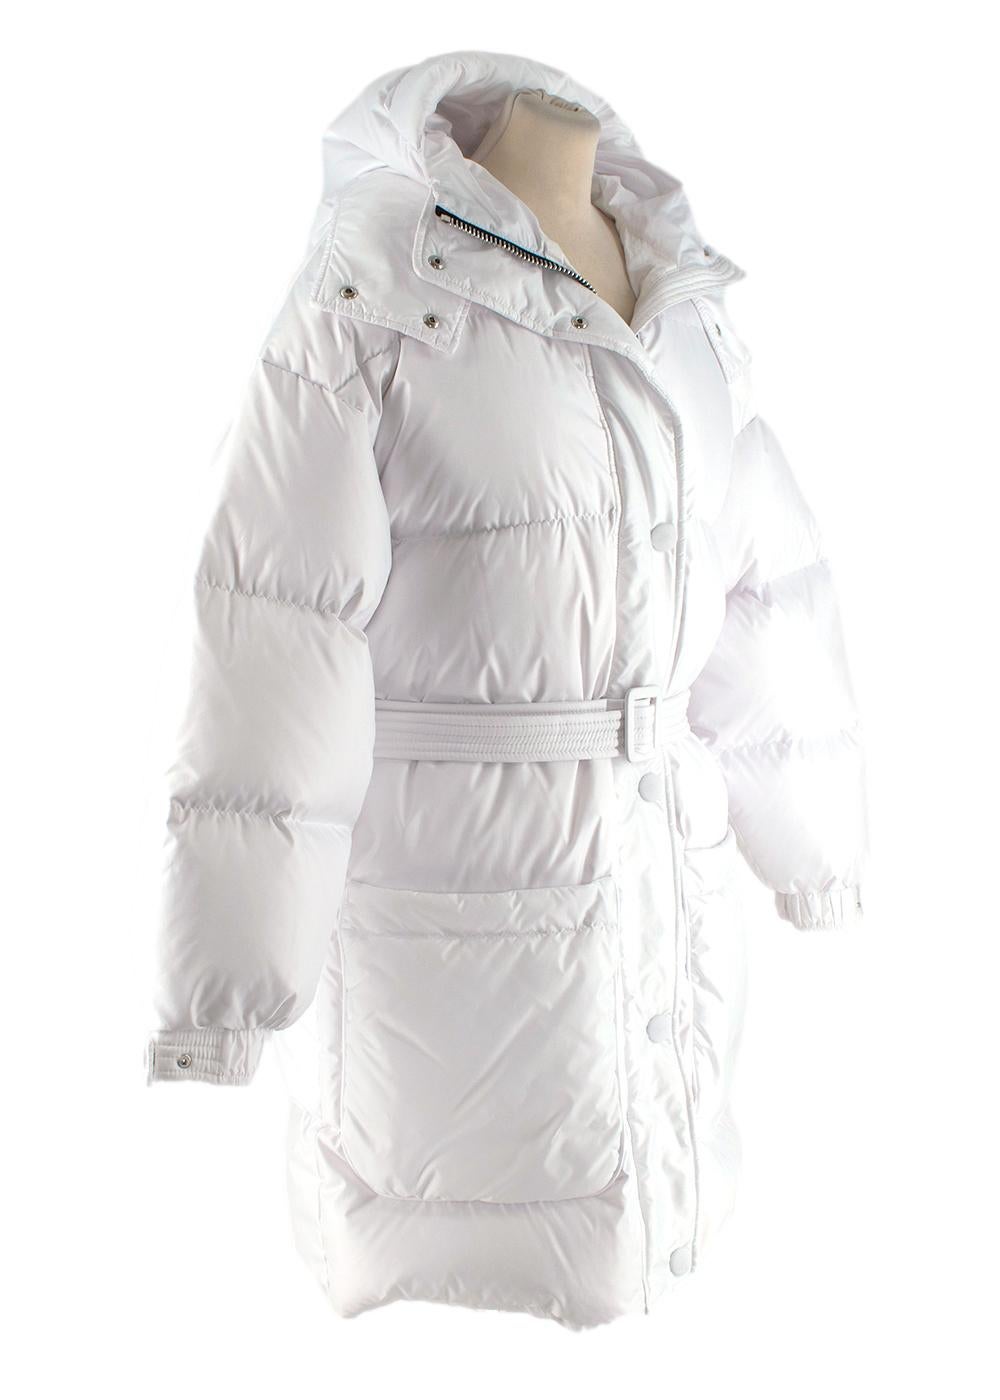 ENKI IENKI Belted Quilted Shell Down Jacket

- Brilliant white shell jacket filled with sumptuous goosedown
- Mid-length finishing on the thigh, with a tonal belt for waist definition
- Duel hood effect, with peak front detail
- Double-ended zip